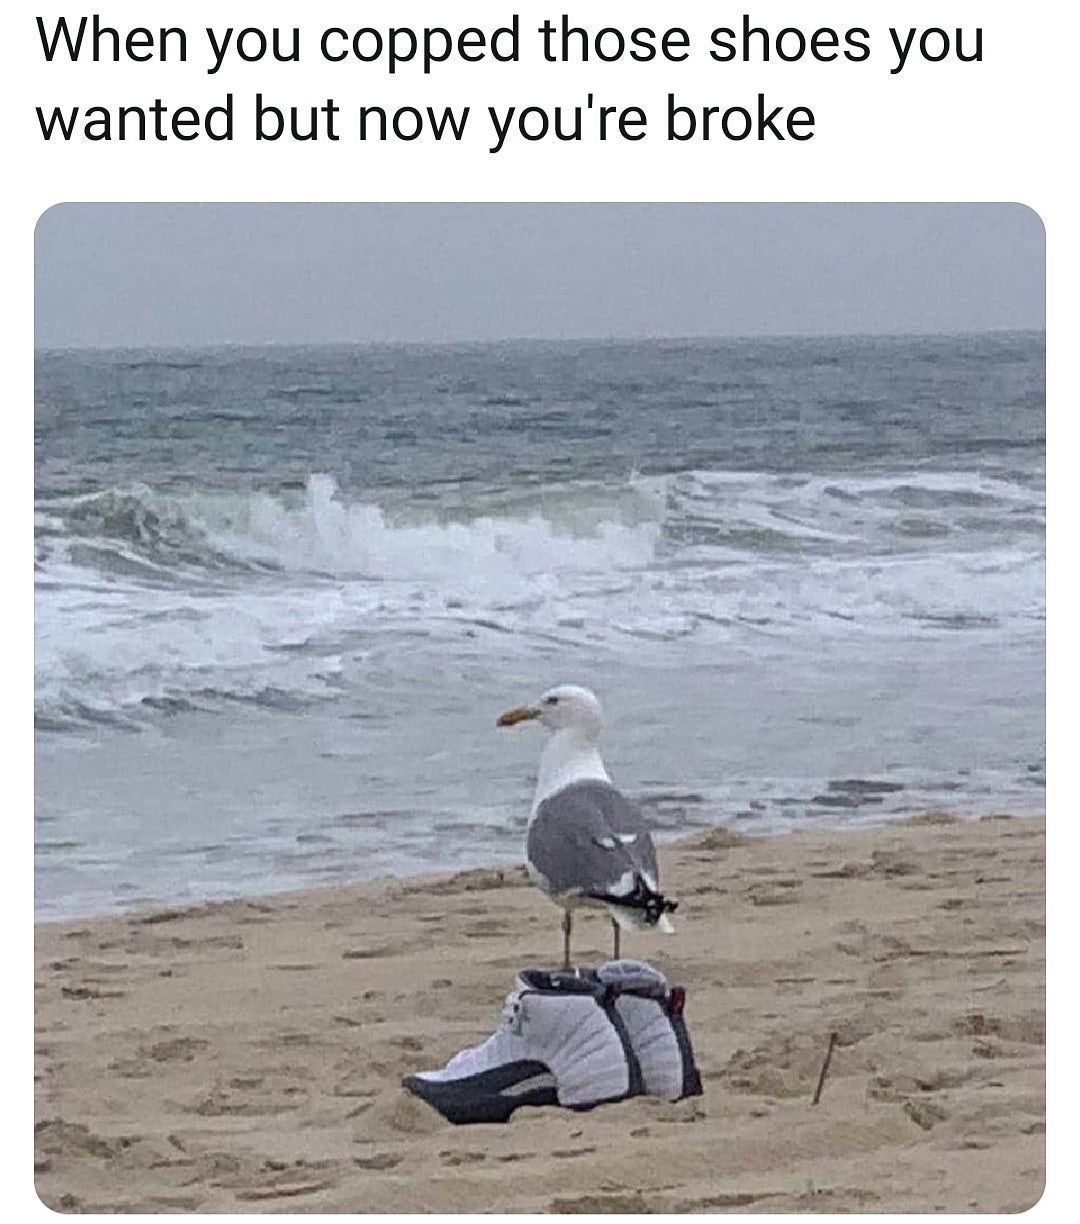 dank memes bird in shoes meme - When you copped those shoes you wanted but now you're broke